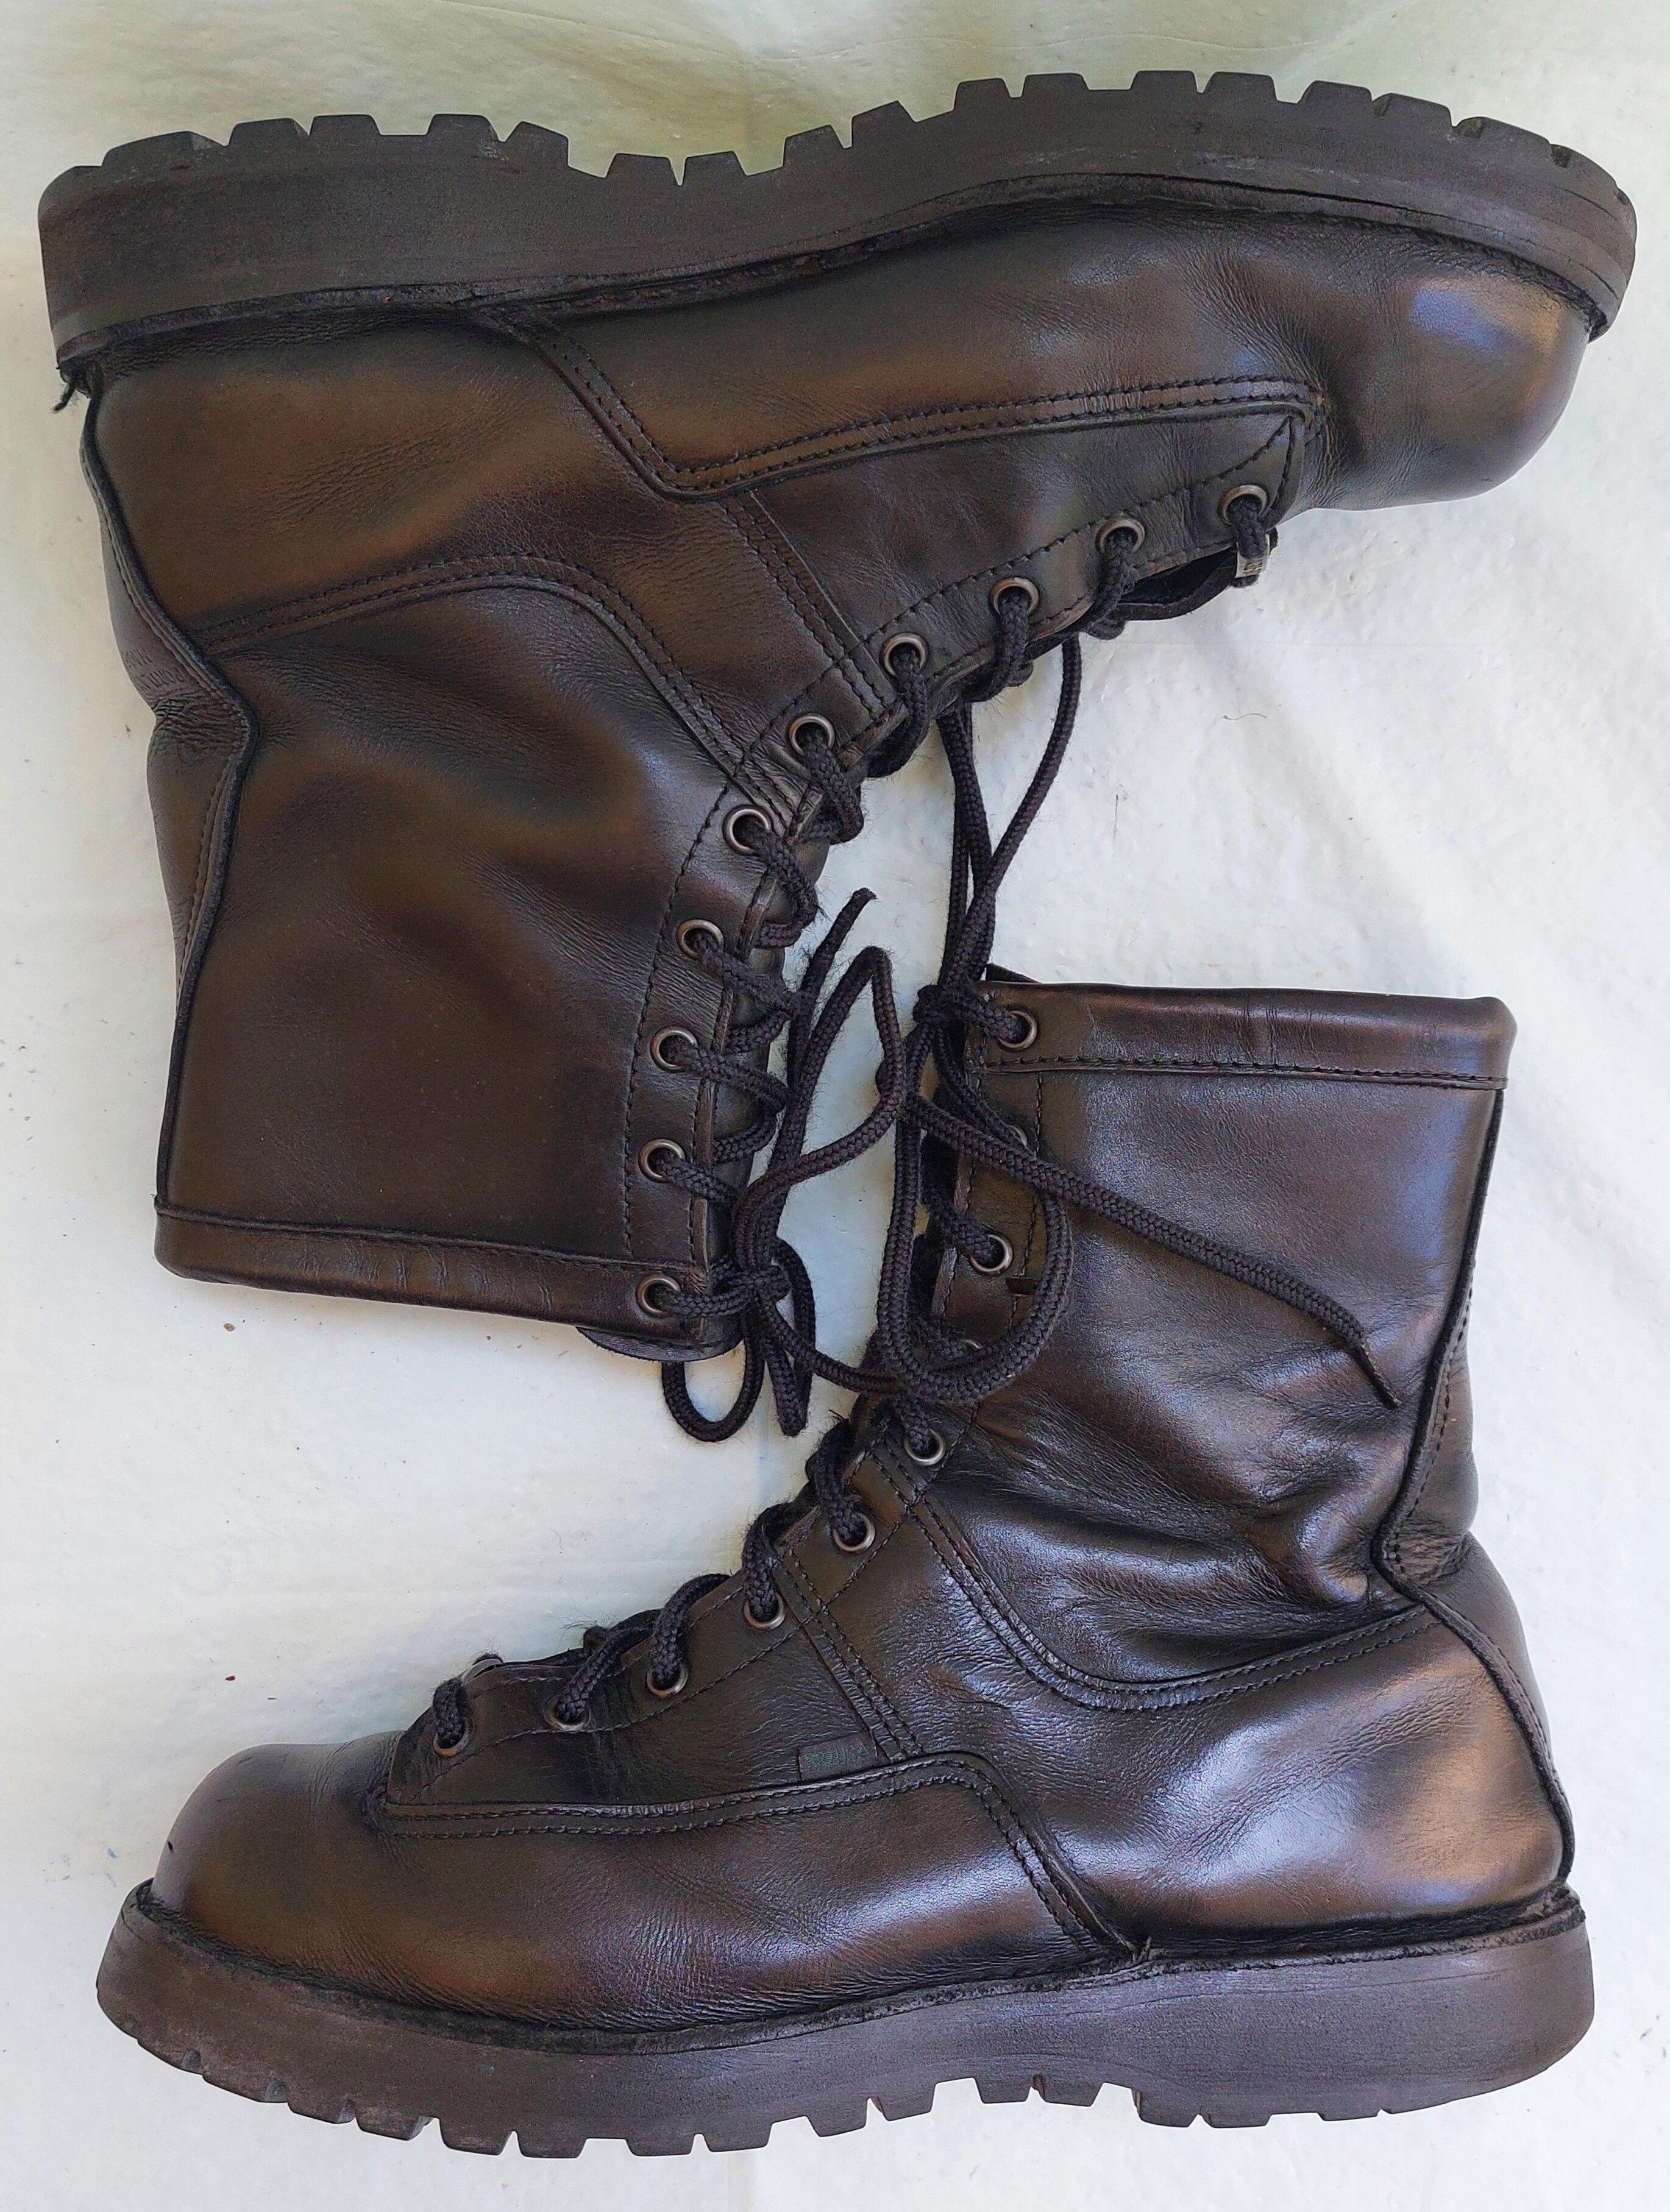 Danner DANNER RECON 8" black insulated 200G GORE-TEX combat boots Size US 10 / EU 43 - 2 Preview